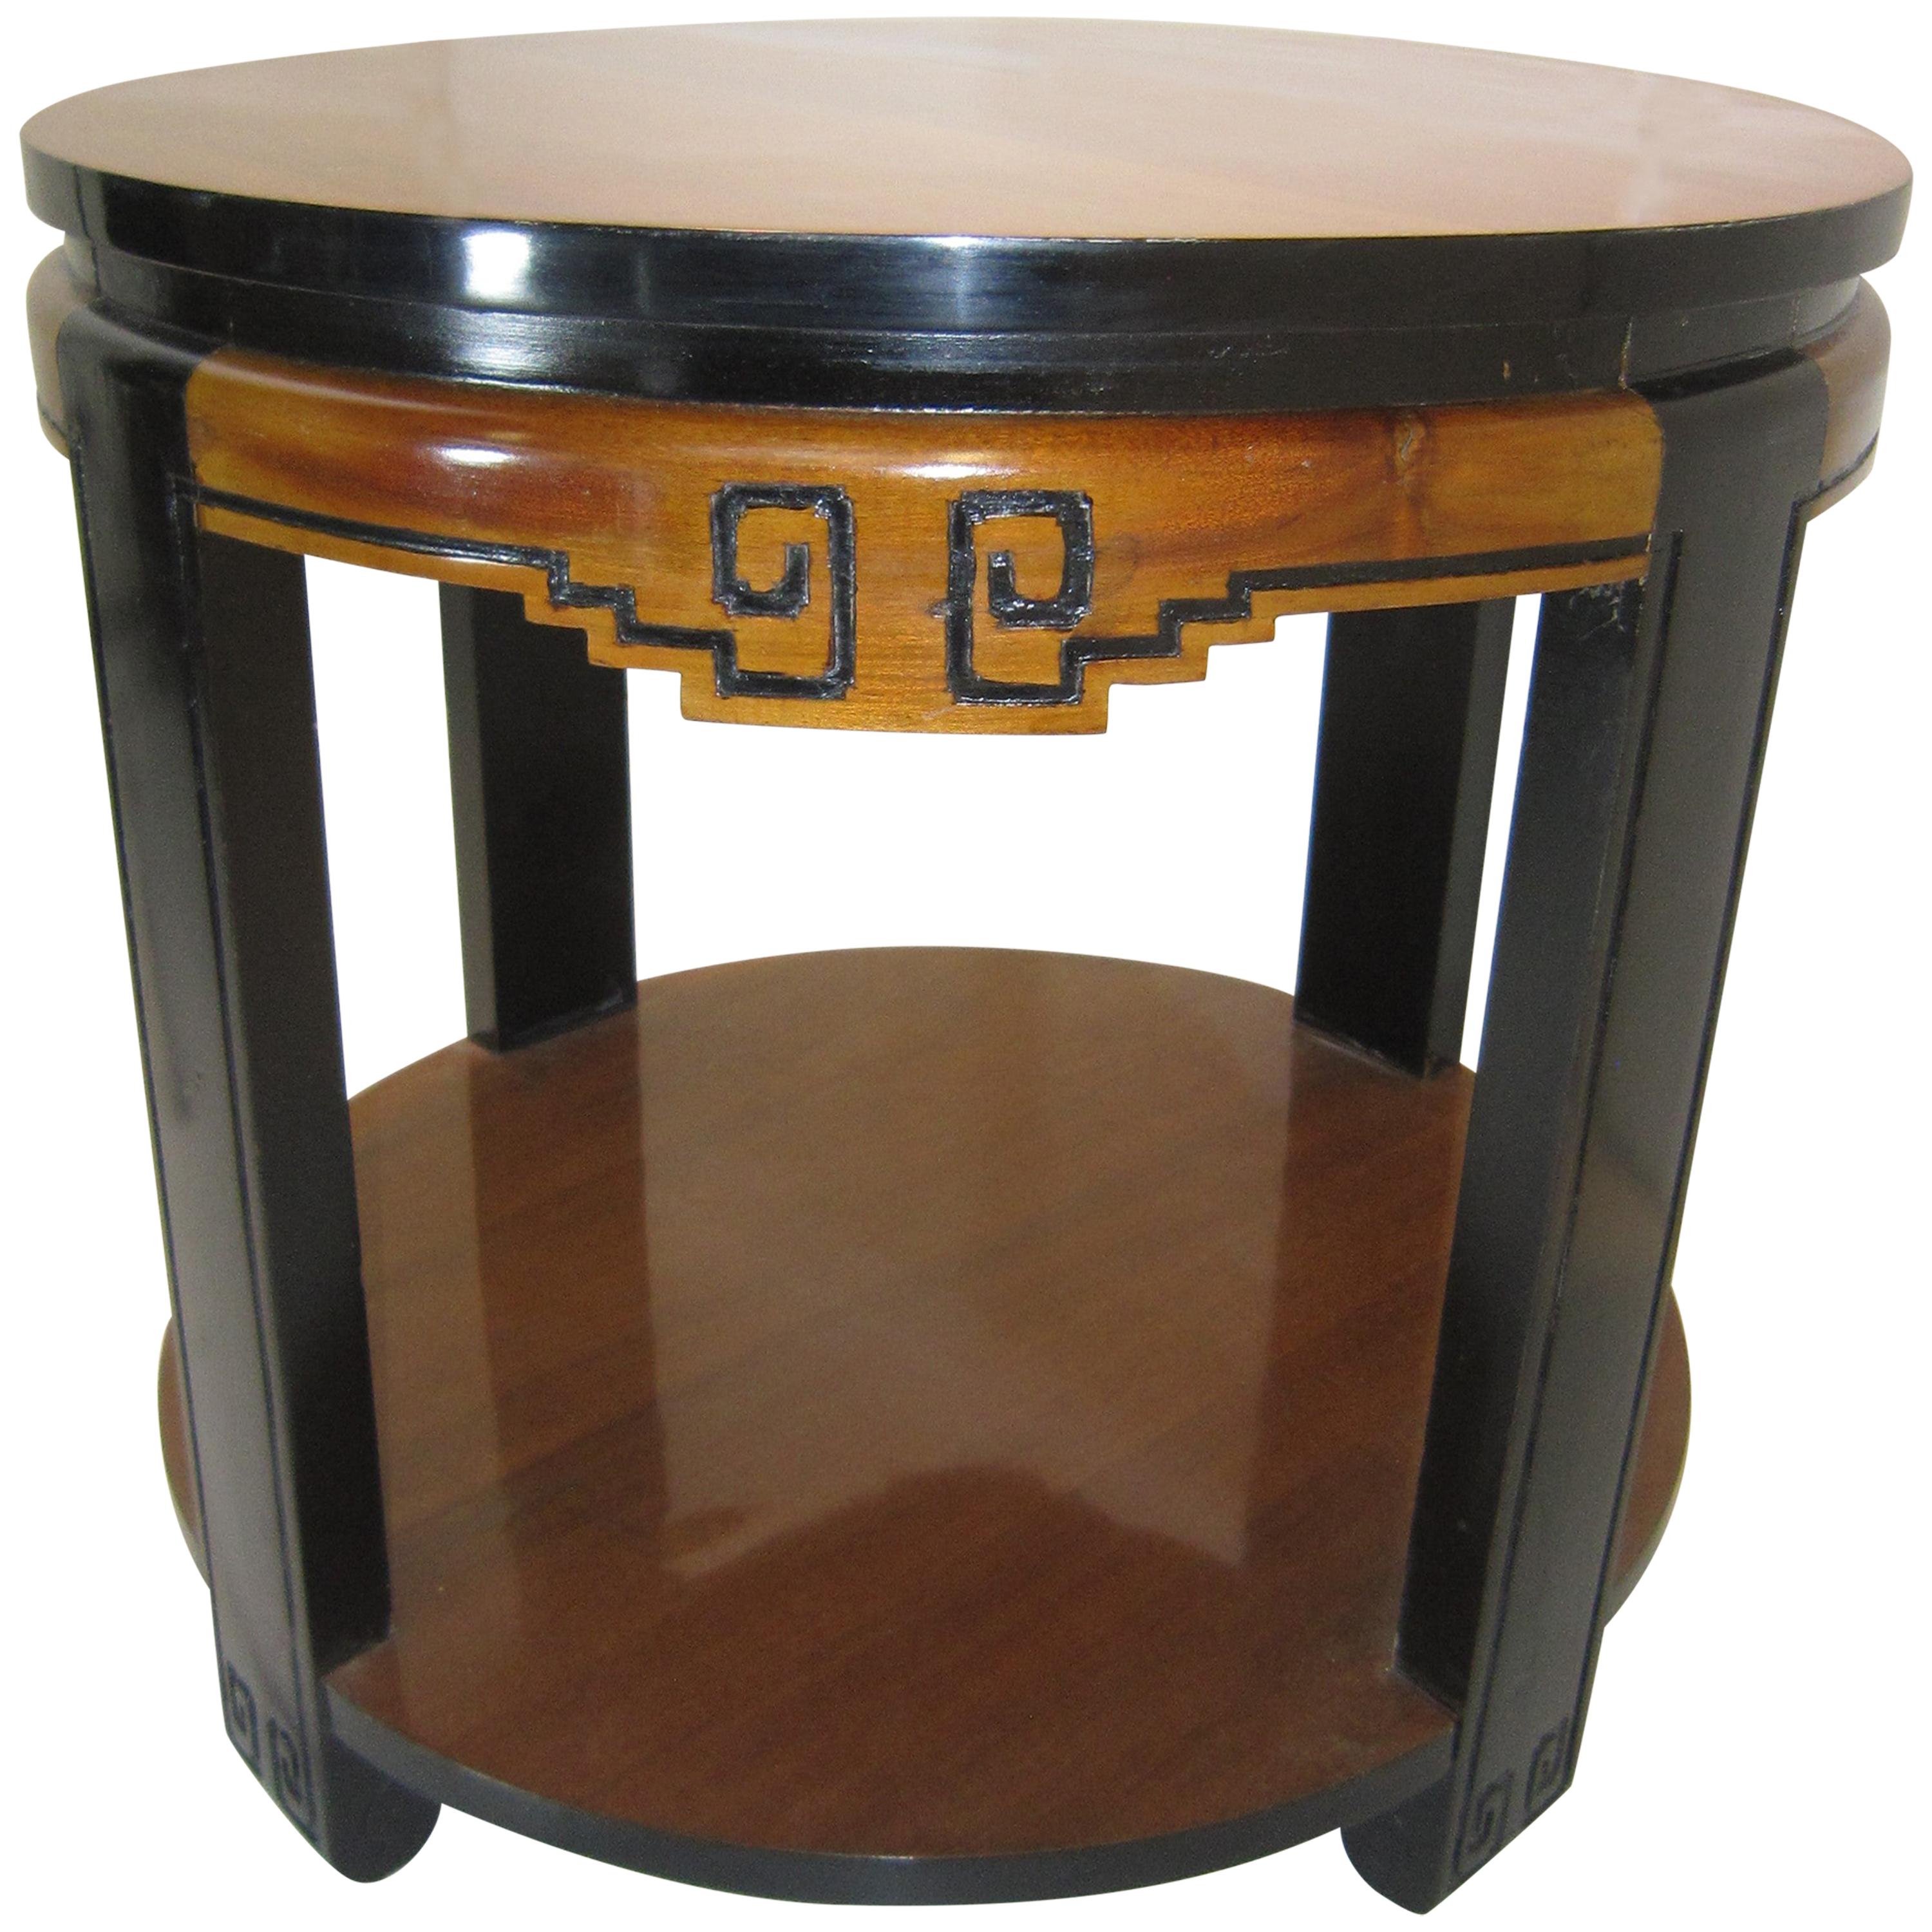 Original Art Deco Two-Tone Circular Table with Chinoiserie Design For Sale